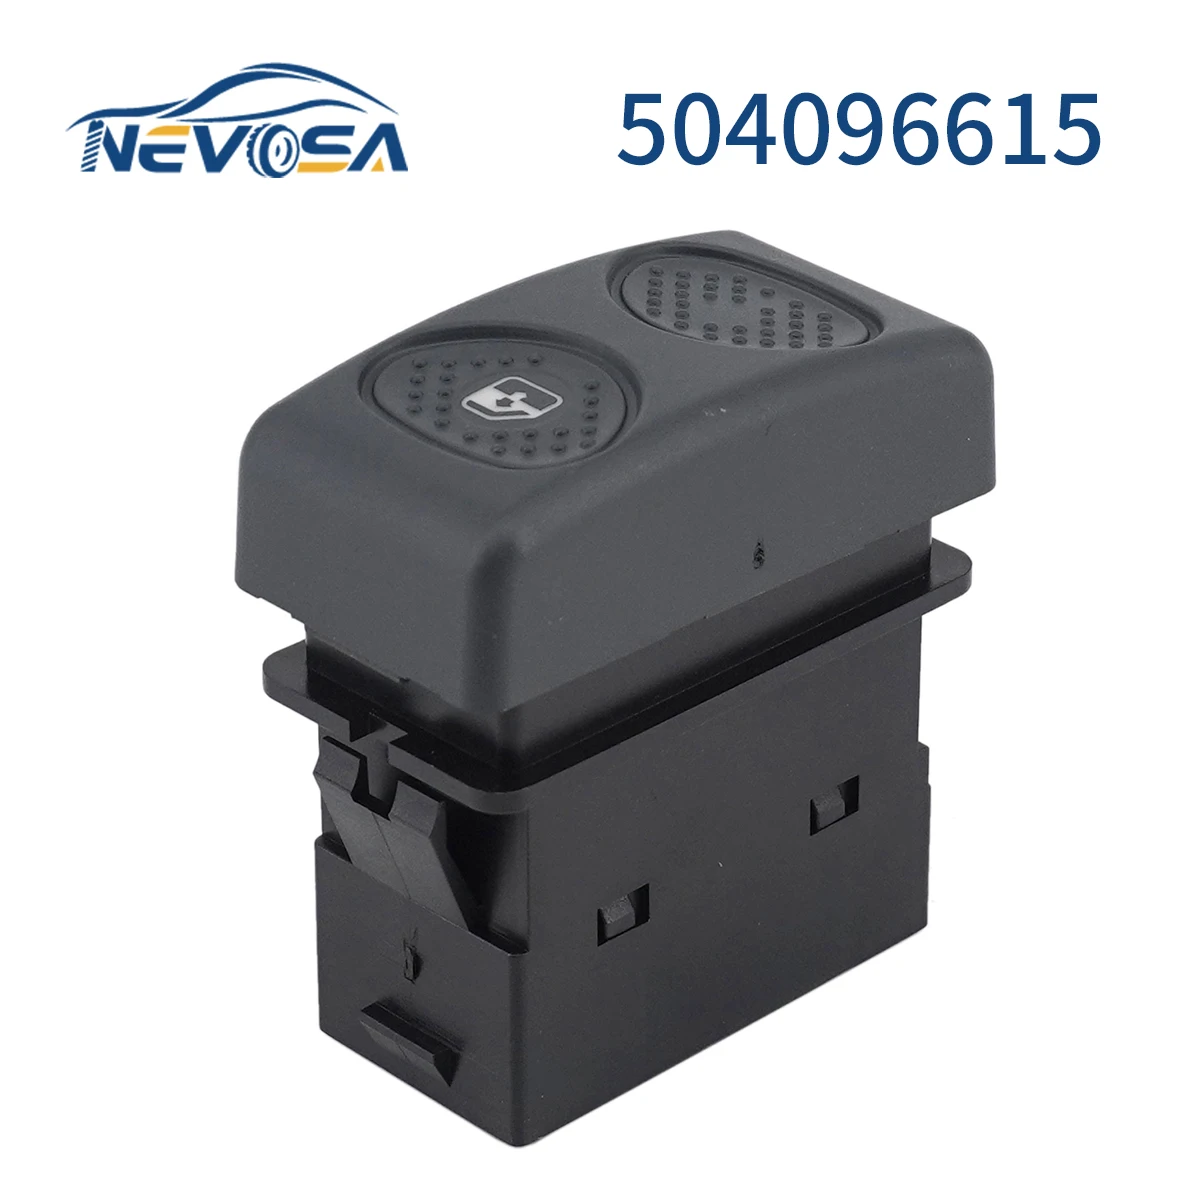 

NEVOSA 504096615 For IVECO Eurocargo Car Accessories Power Master Window Switch Control Button 8Pins Green Light BP127-254O